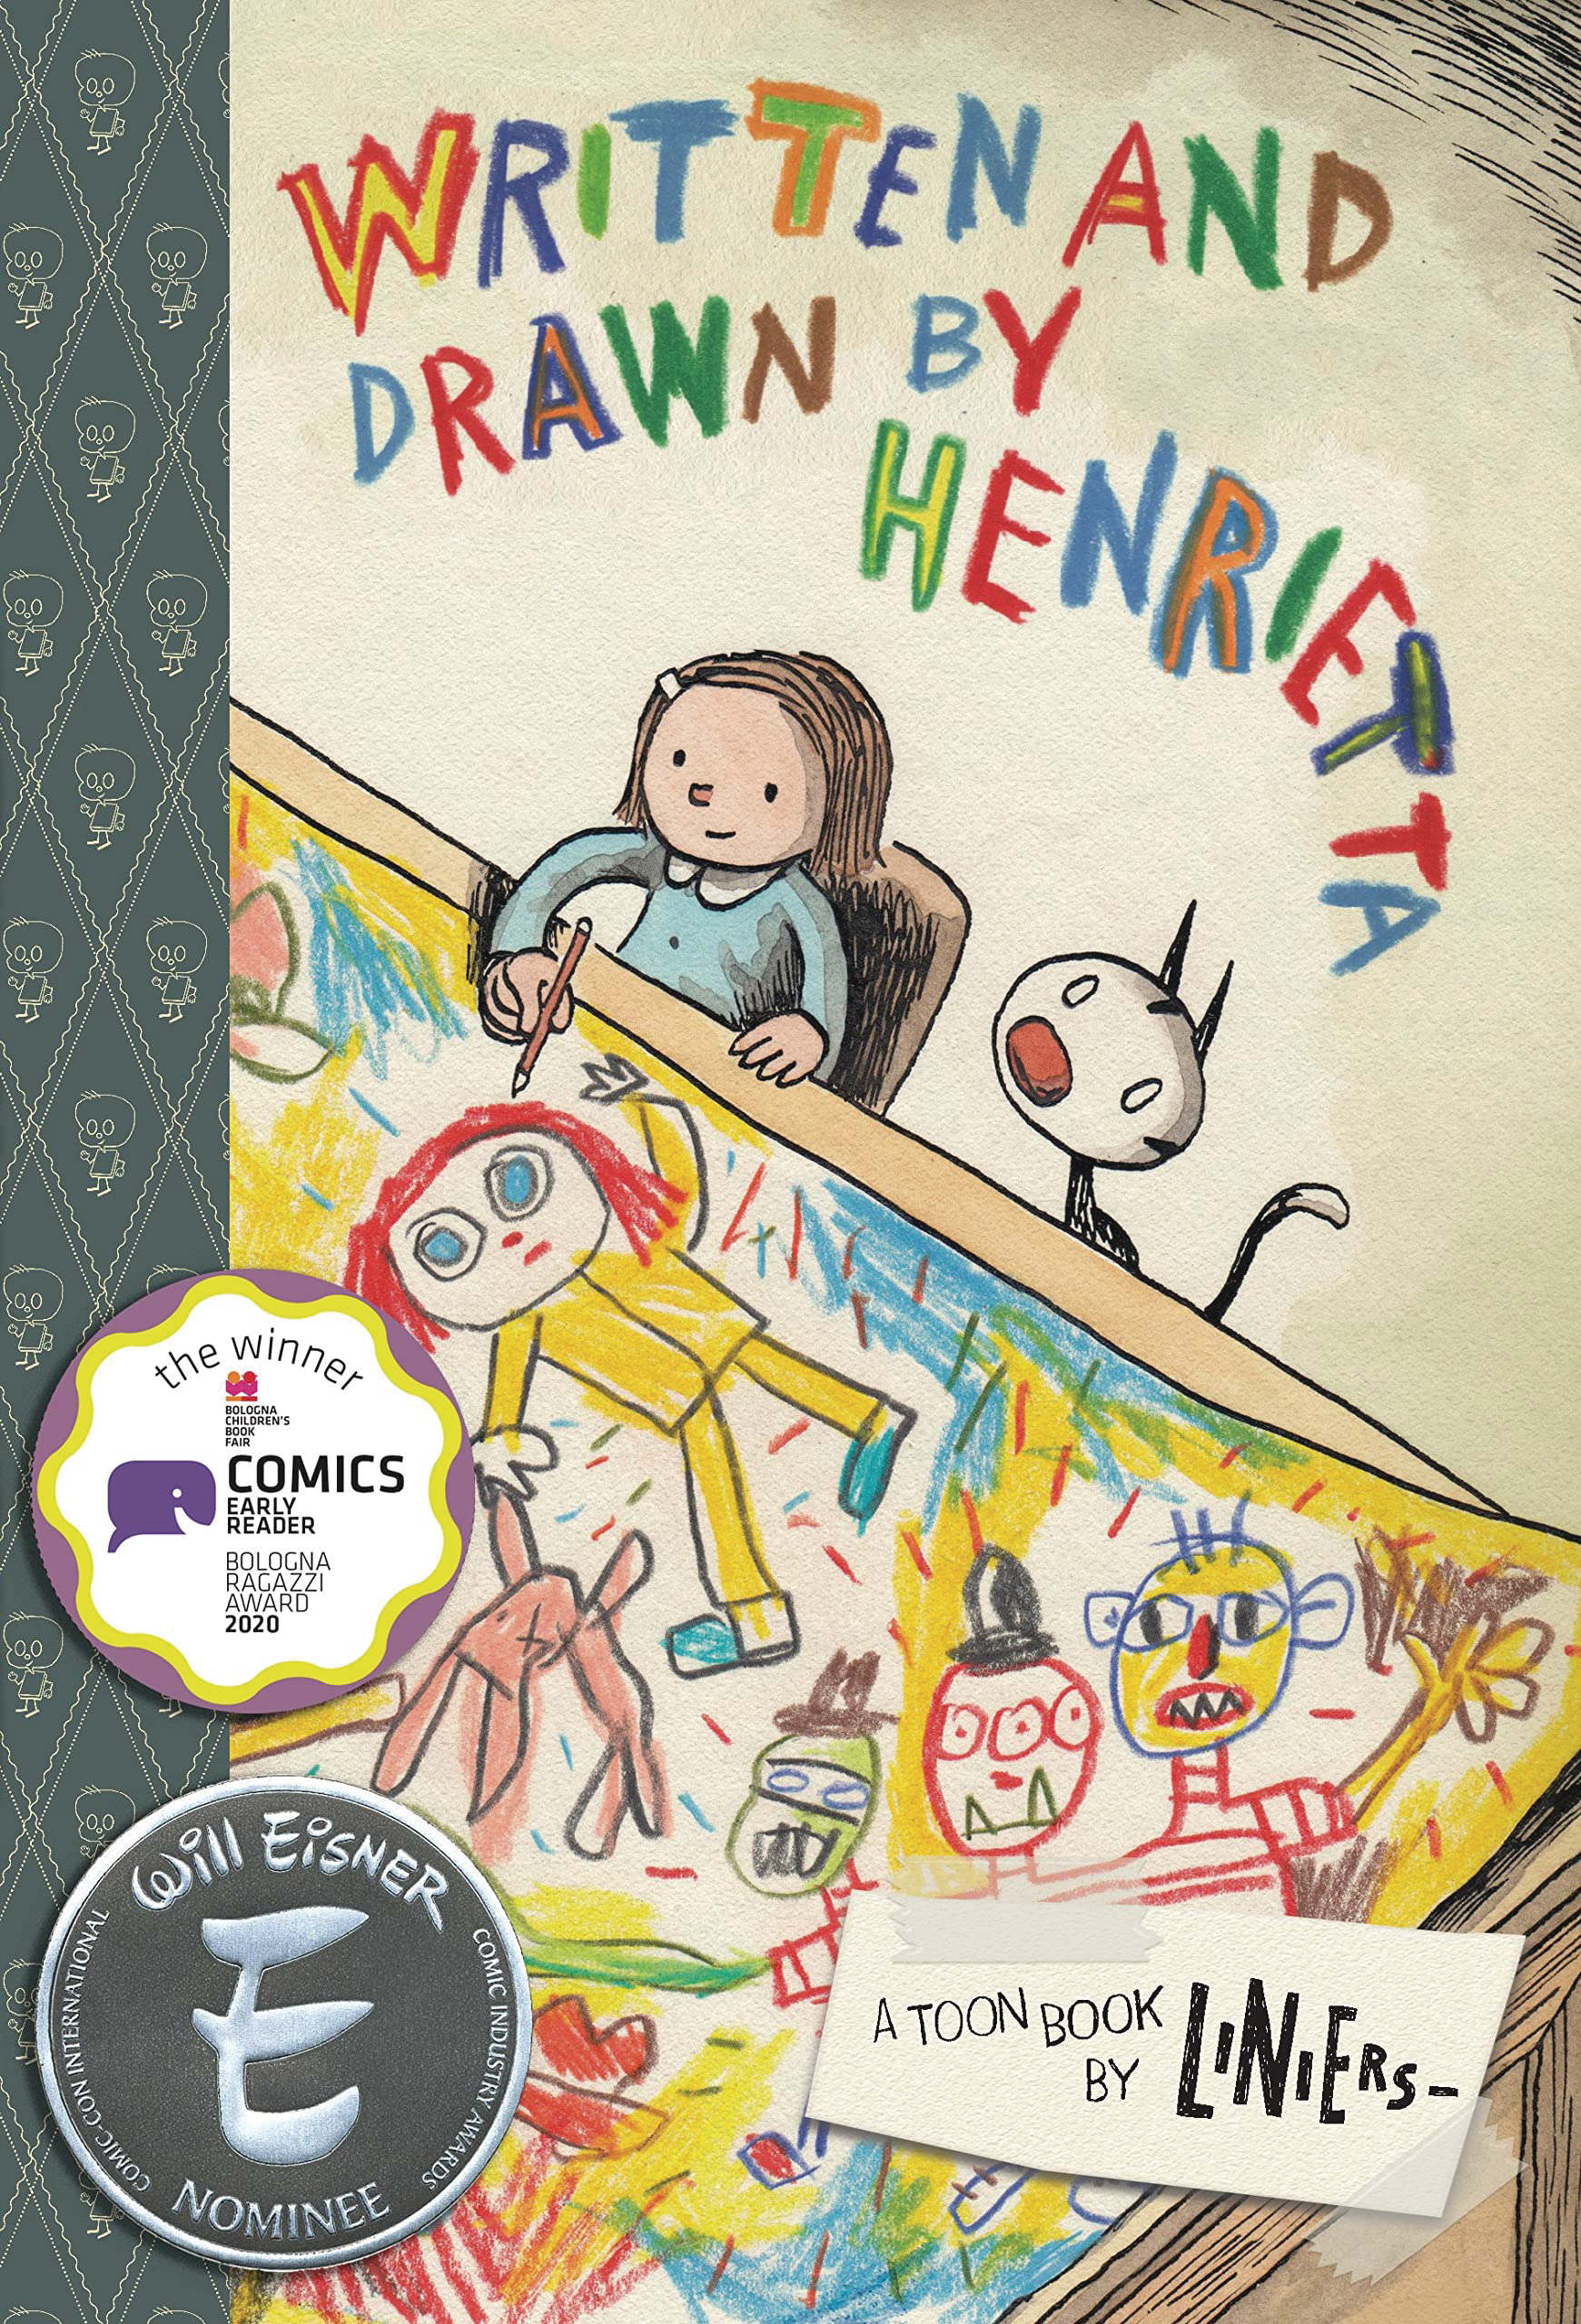 Written And Drawn by Henrietta Soft Cover